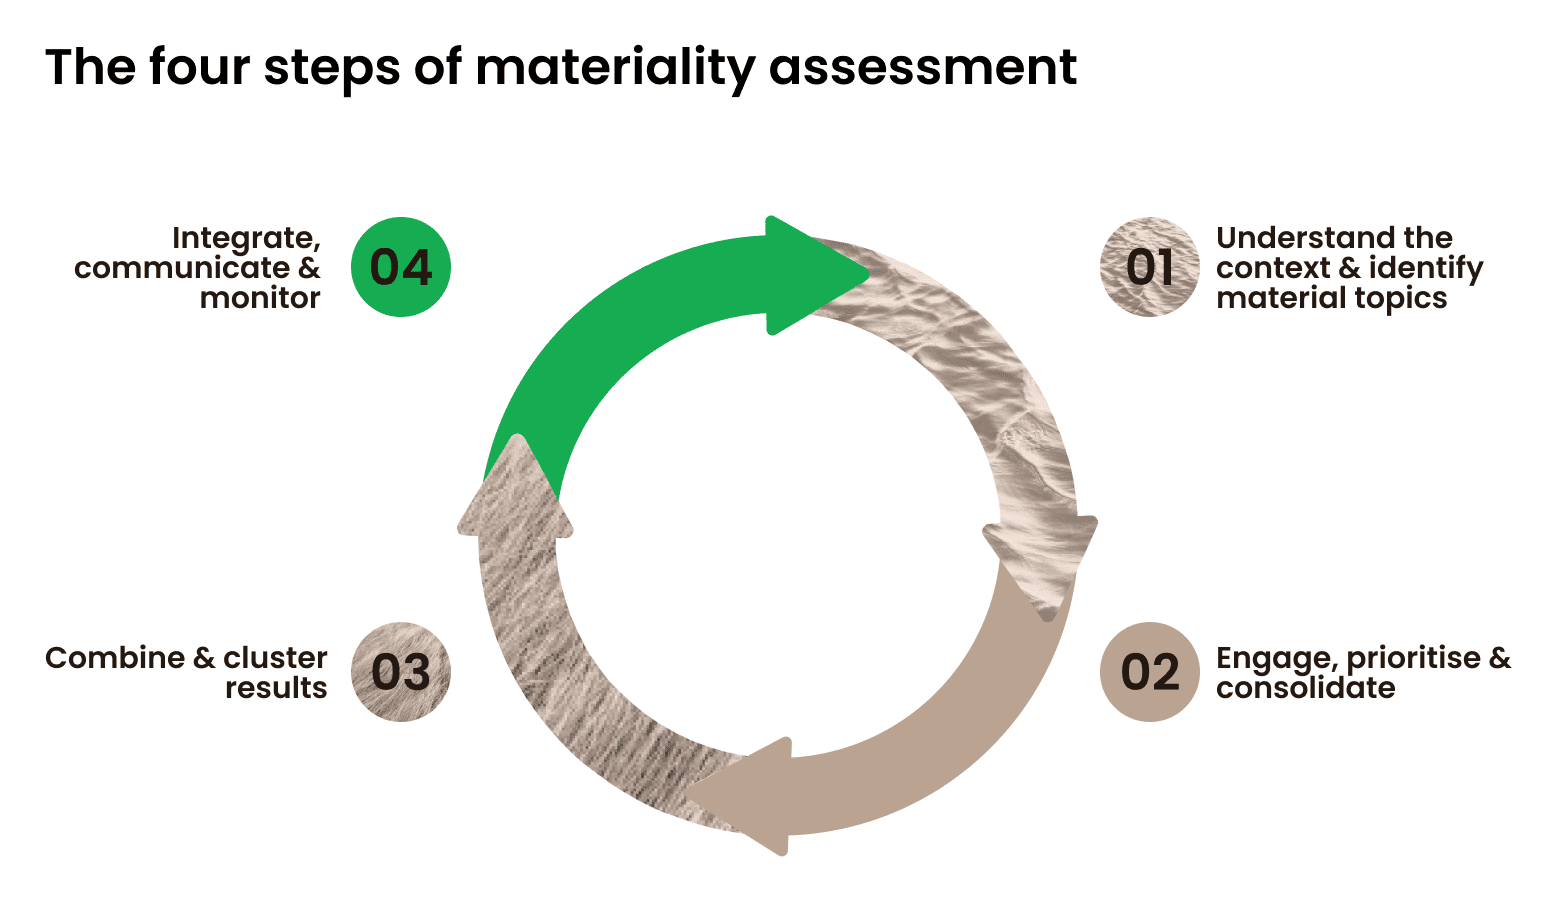 How to perform a materiality assessment